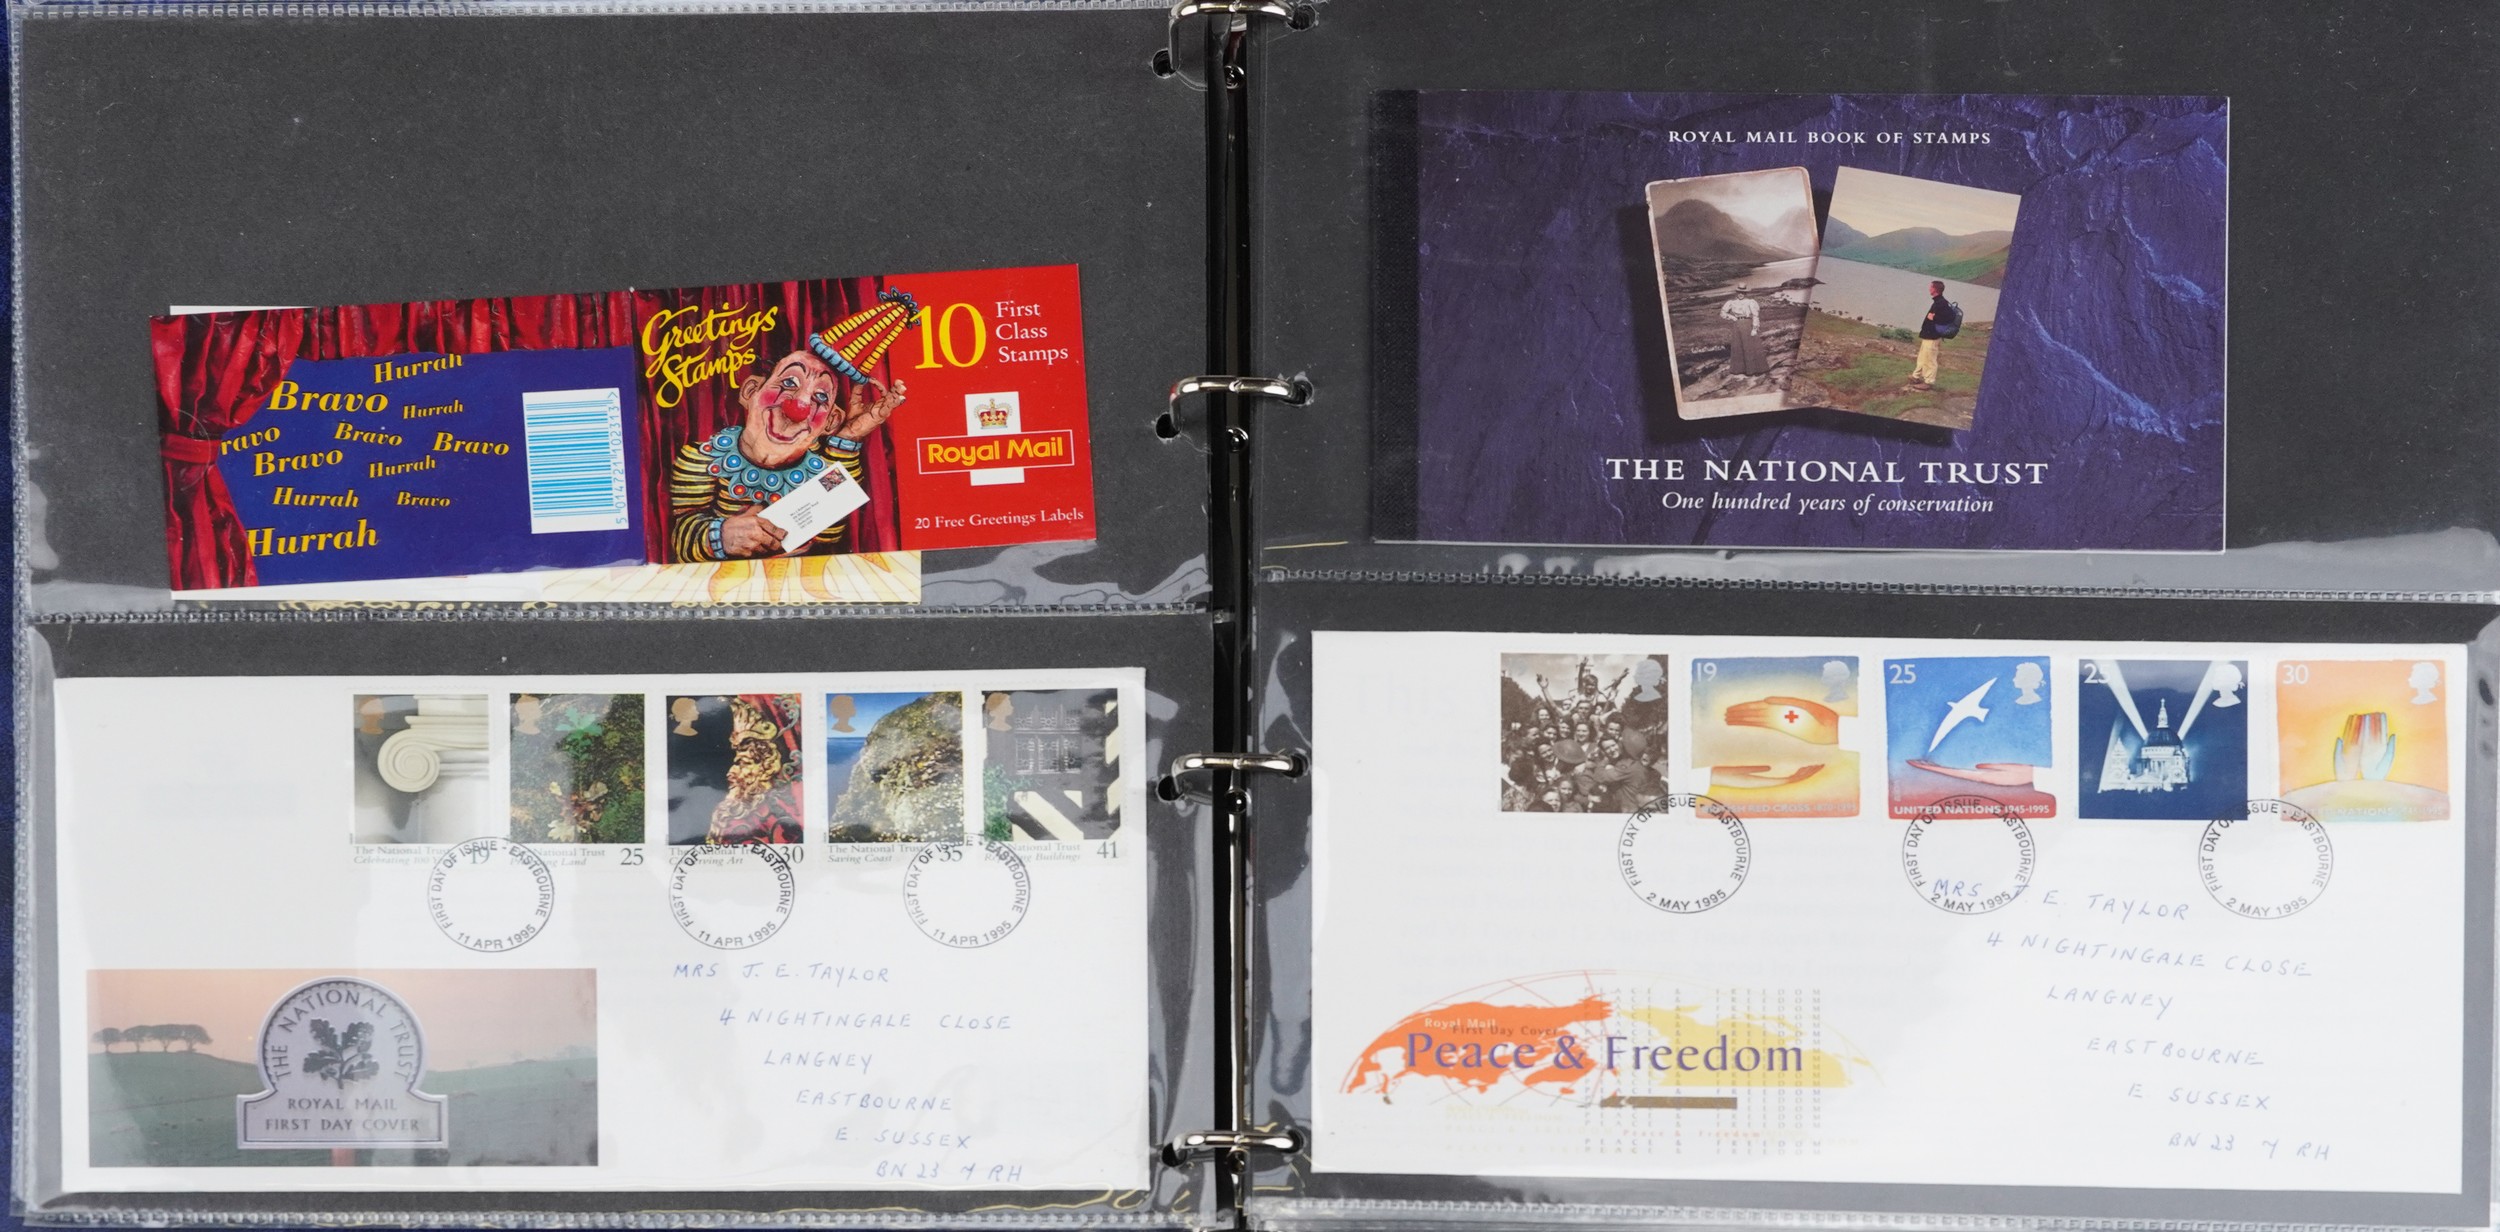 Collection of British mint stamps, booklets and first day covers arranged in three albums